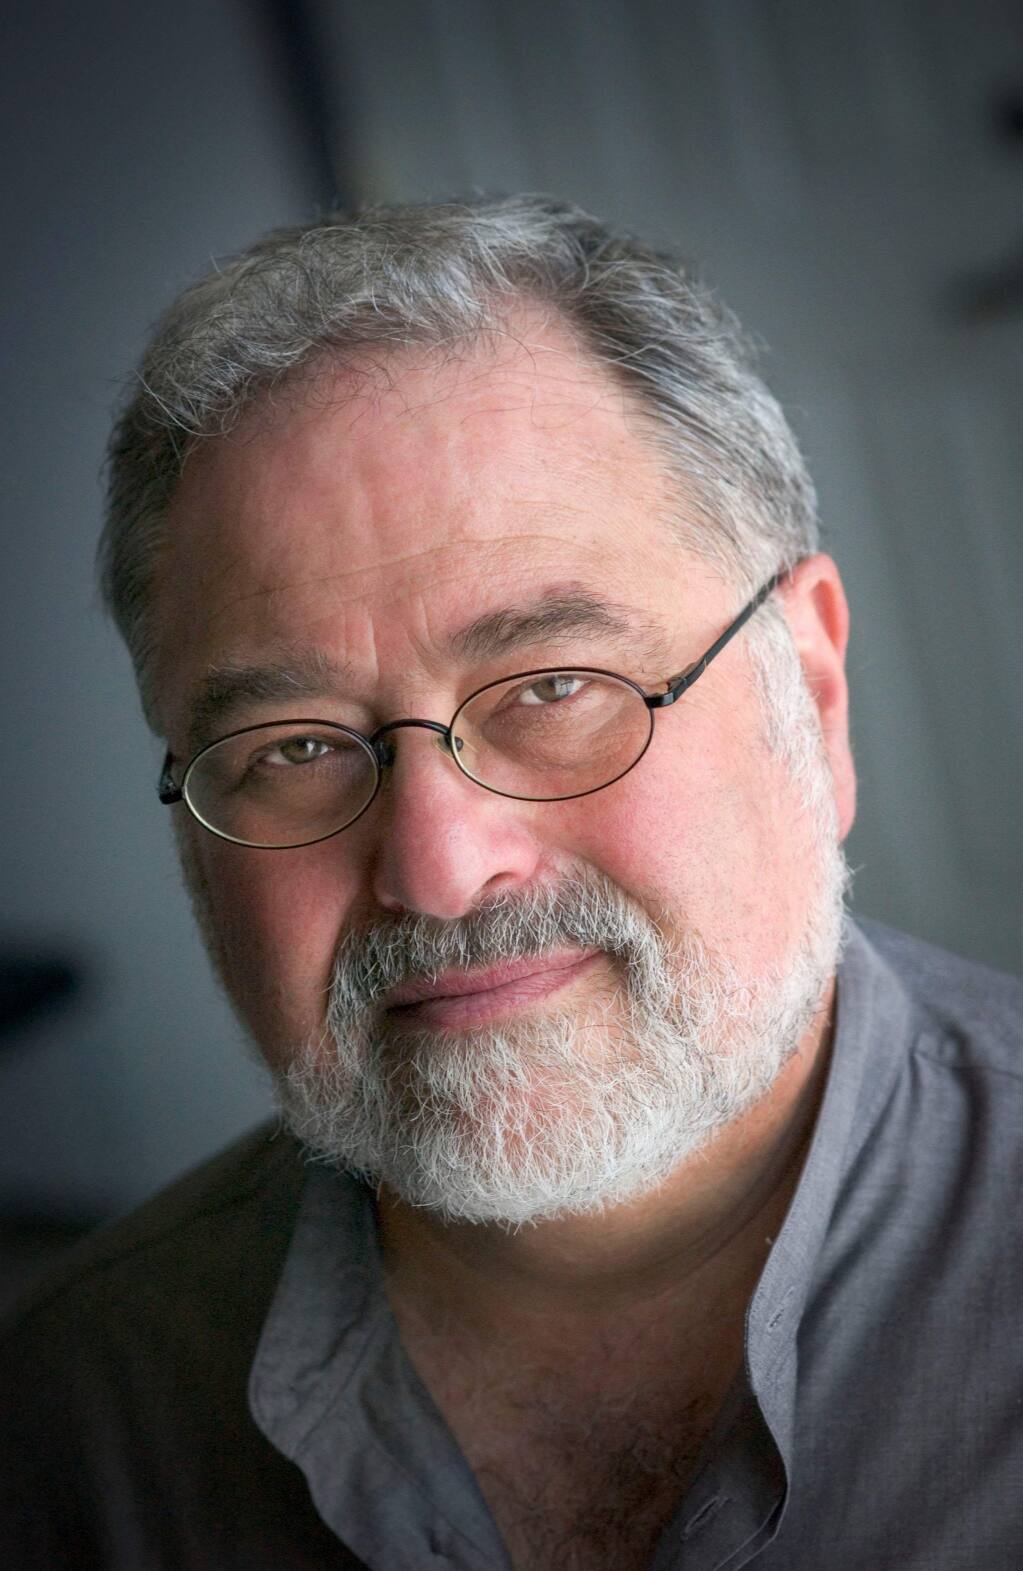 George Lakoff, author of 'Don't Think of an Elephant' and 'The Political Mind,' will lecture at Vintage House on Sunday, Jan. 19. (Submitted photo)